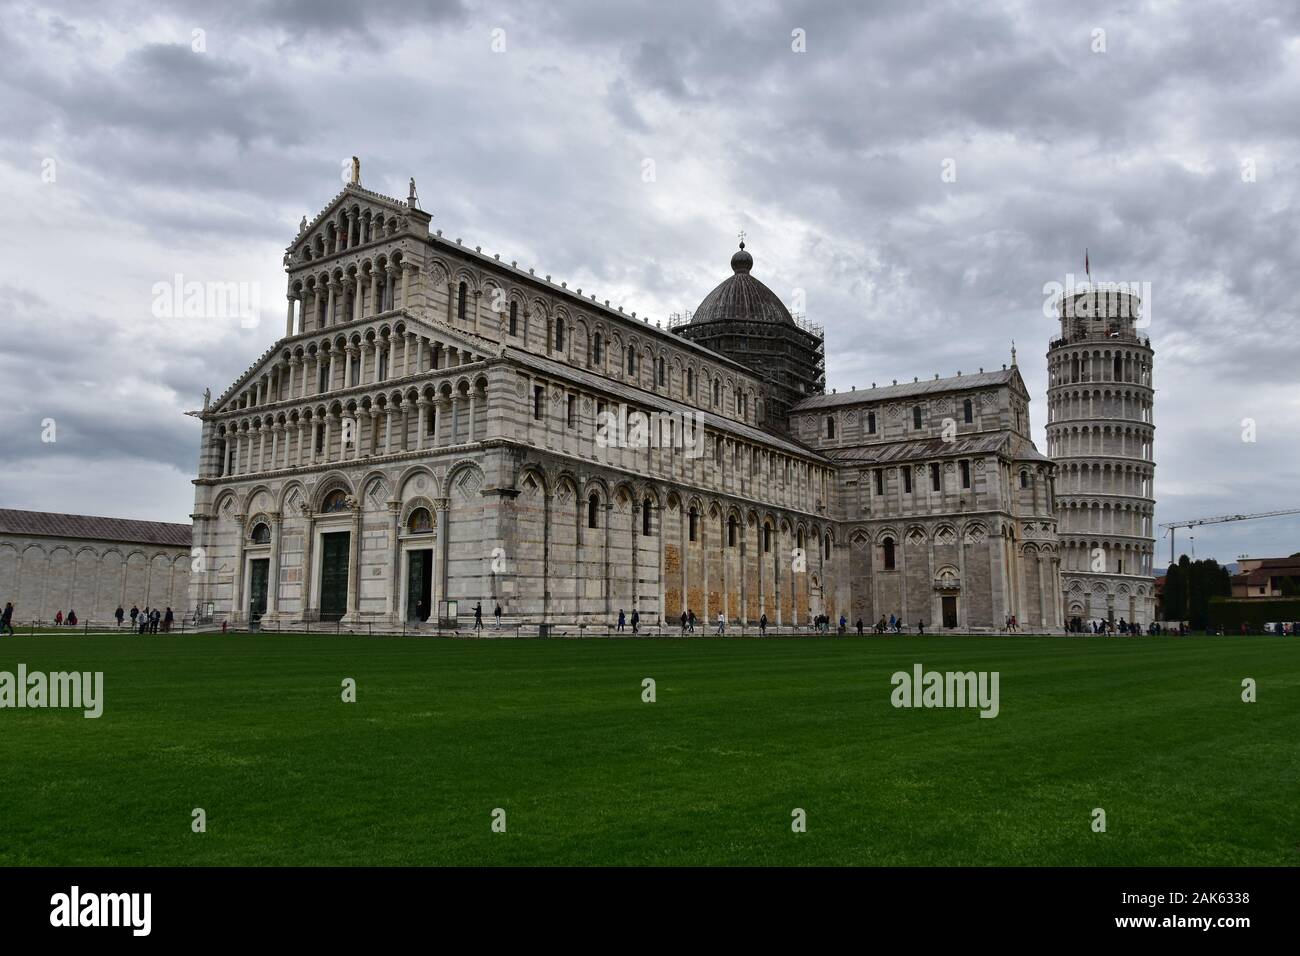 Pisa, Italy - April 11, 2018: Duomo - The Cathedral of Pisa and the Square of Miracles in a rainy day Stock Photo